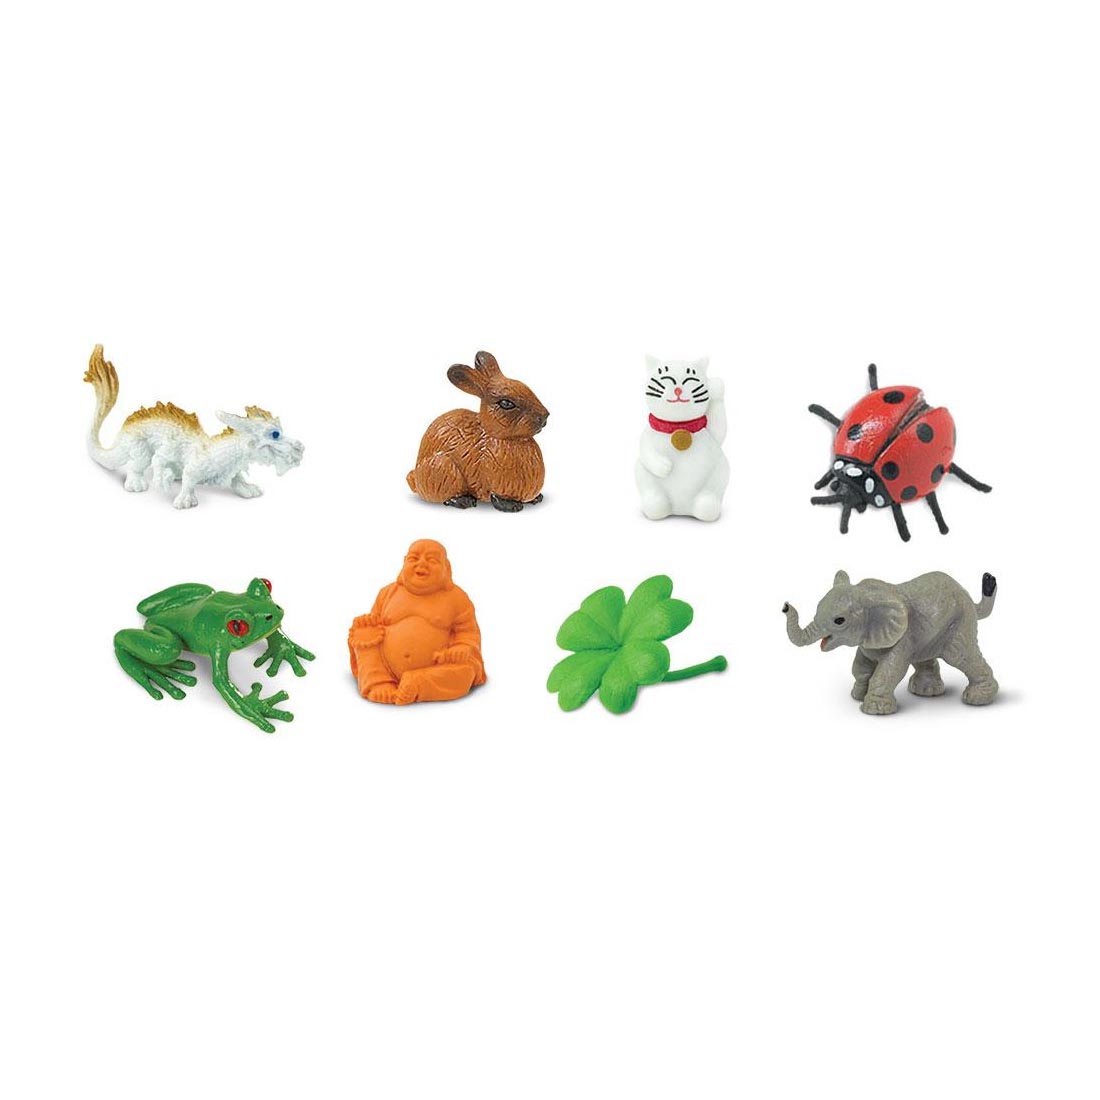 Lucky Mini Figurines include dragon, rabbit, waving cat, ladybug, frog, laughing buddha, 4-leaf clover and elephant